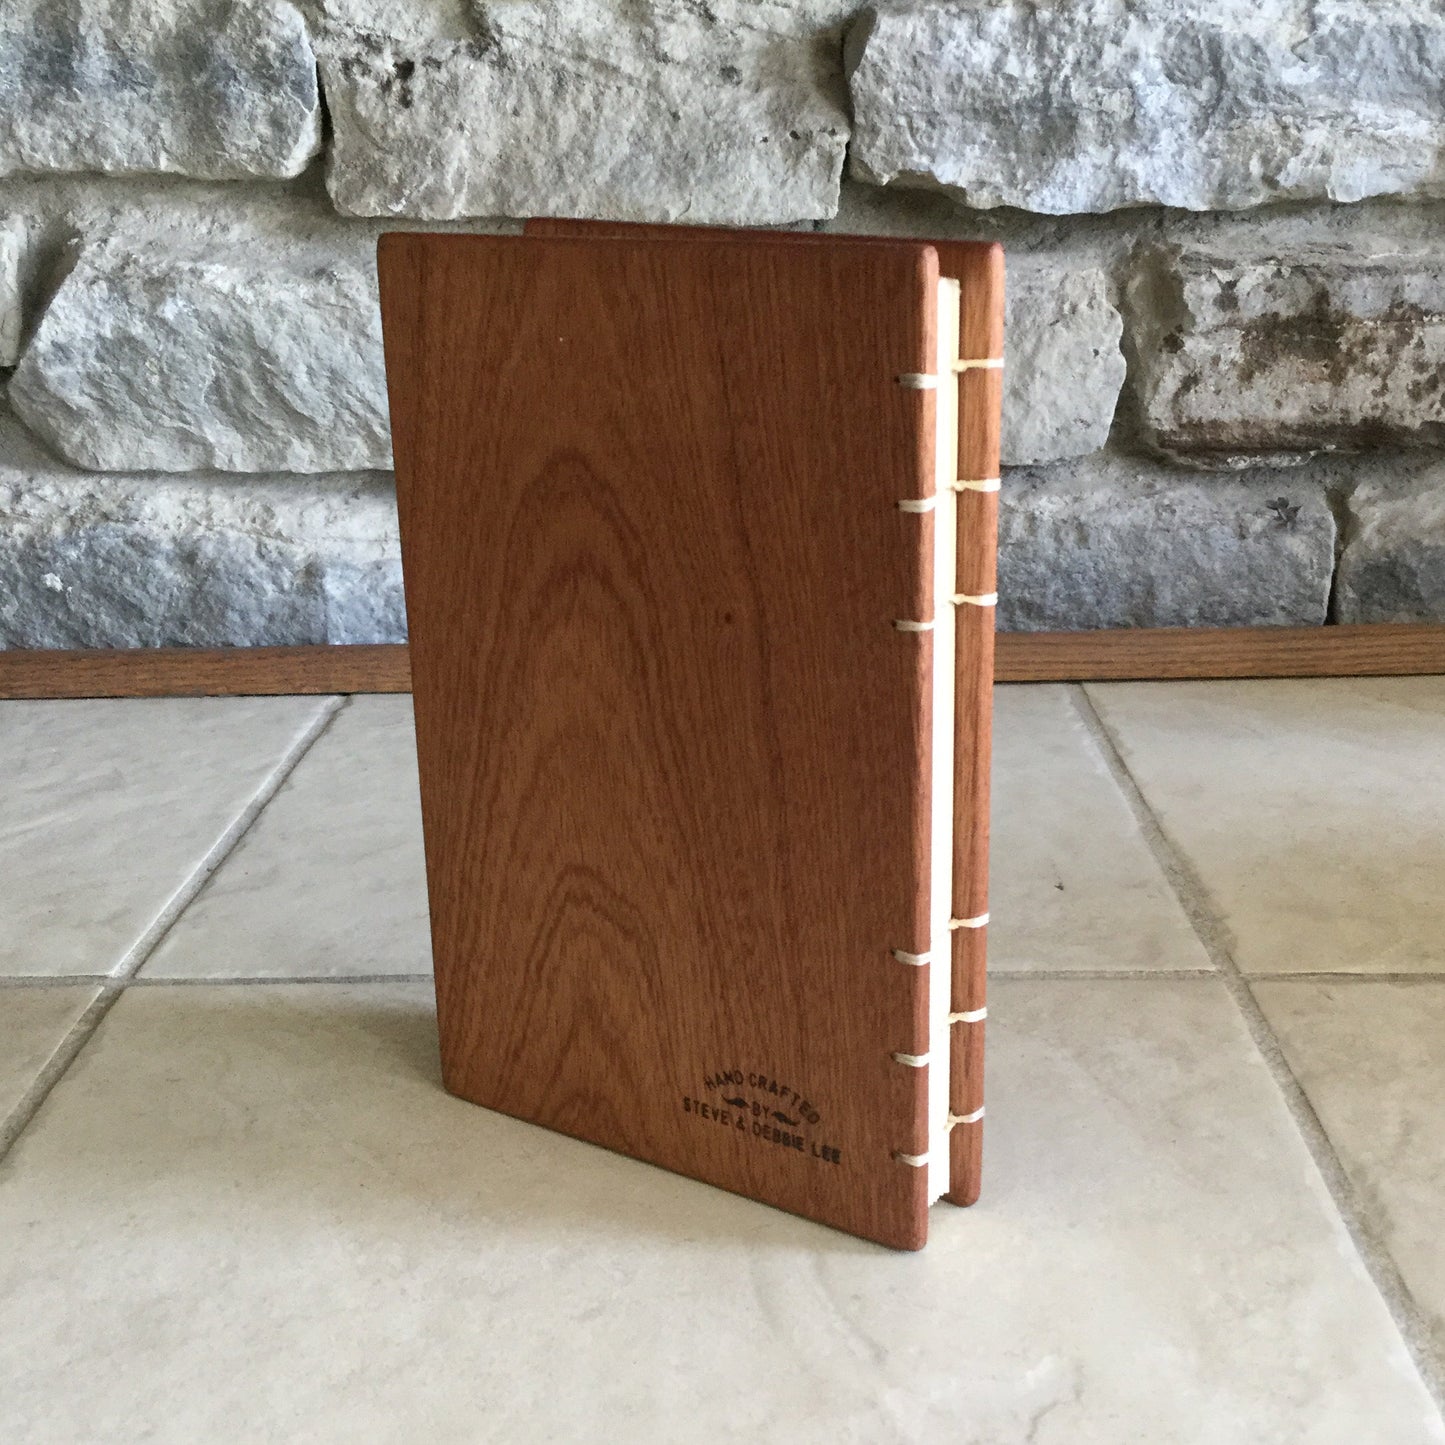 Personalized Bucket List Journal / Diary - Sapele (Mahogany) - Coptic Stitched Custom Carved Diaries, Guest Books, Journals and Notebooks 8th Line Creations 